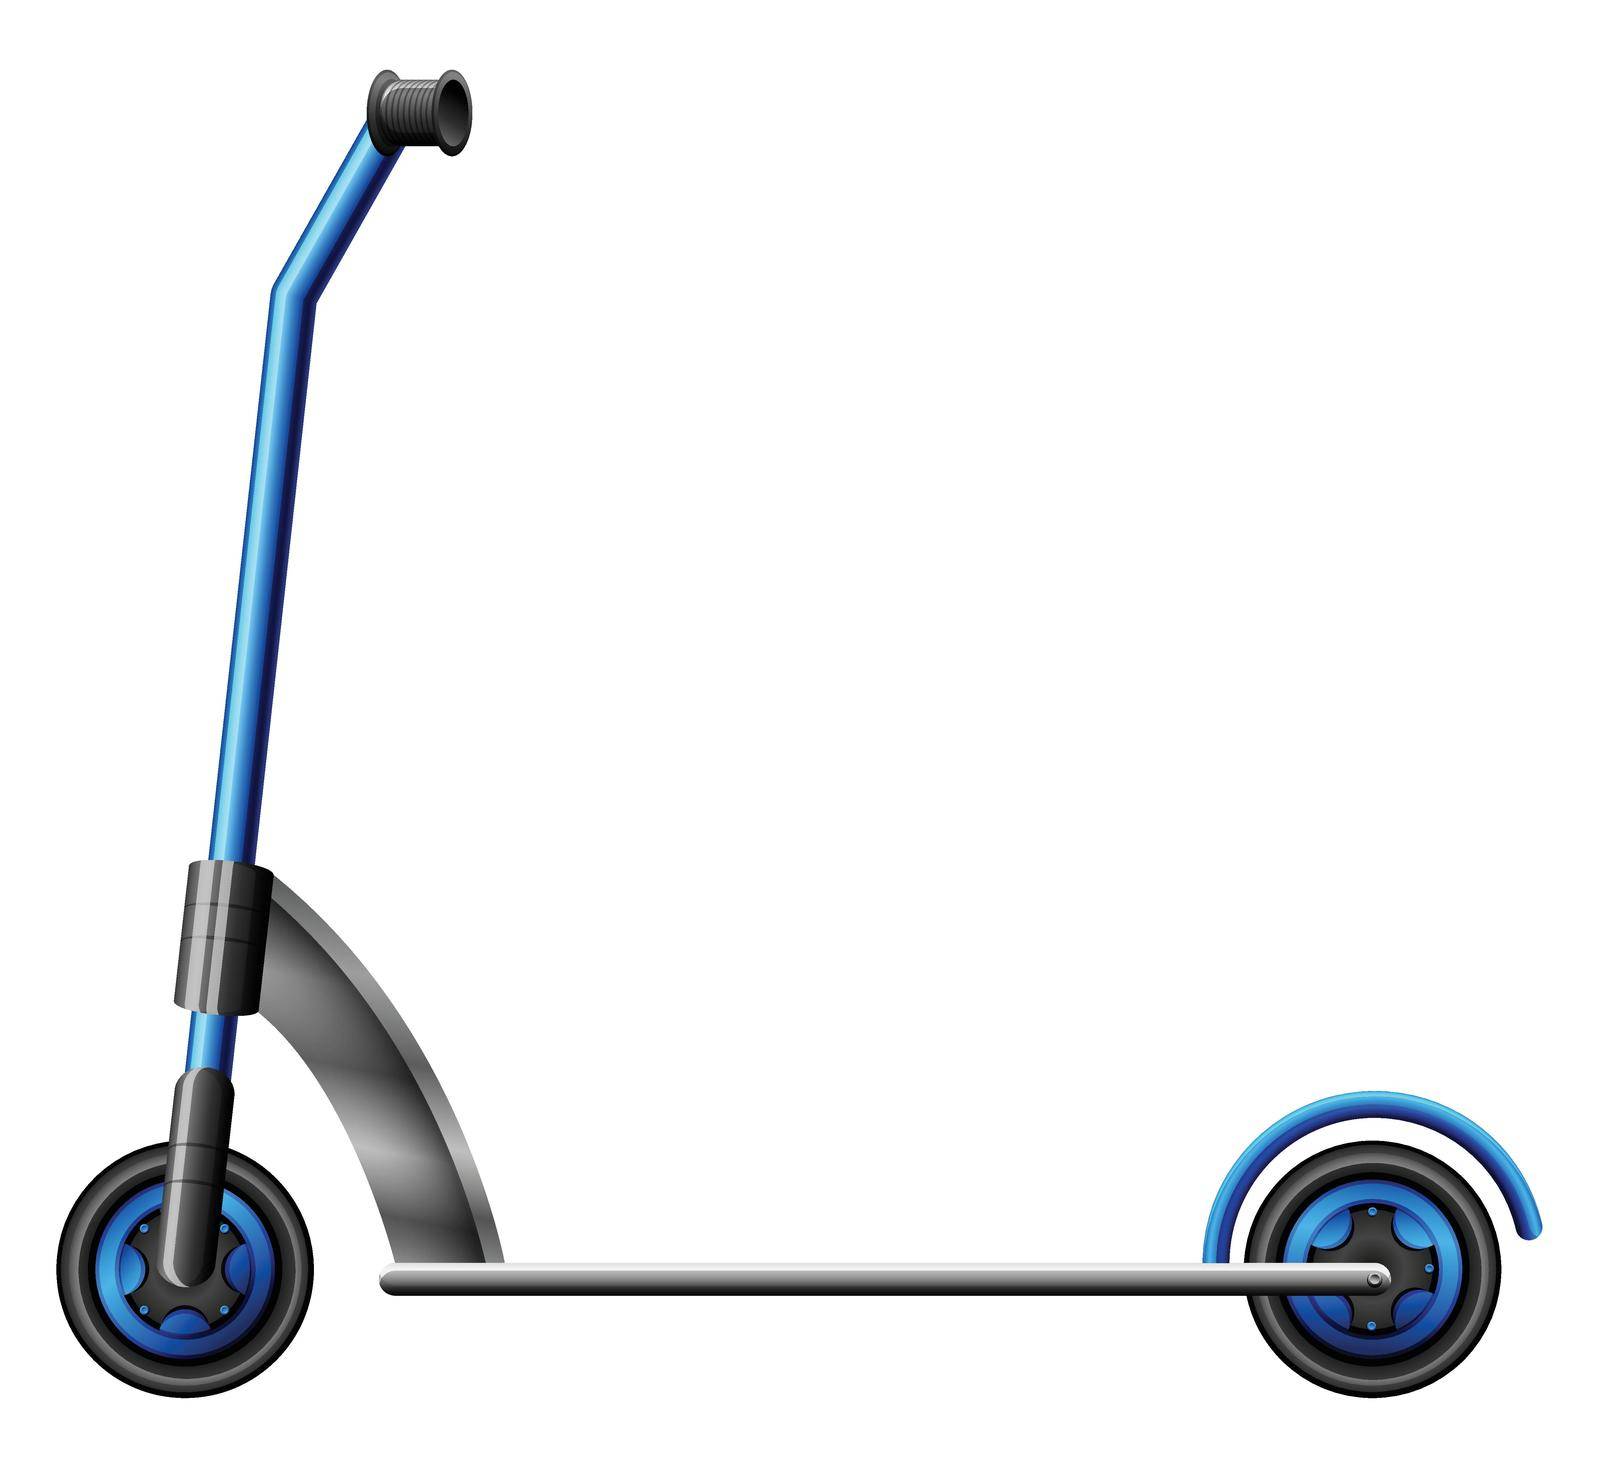 A blue scooter on a white background